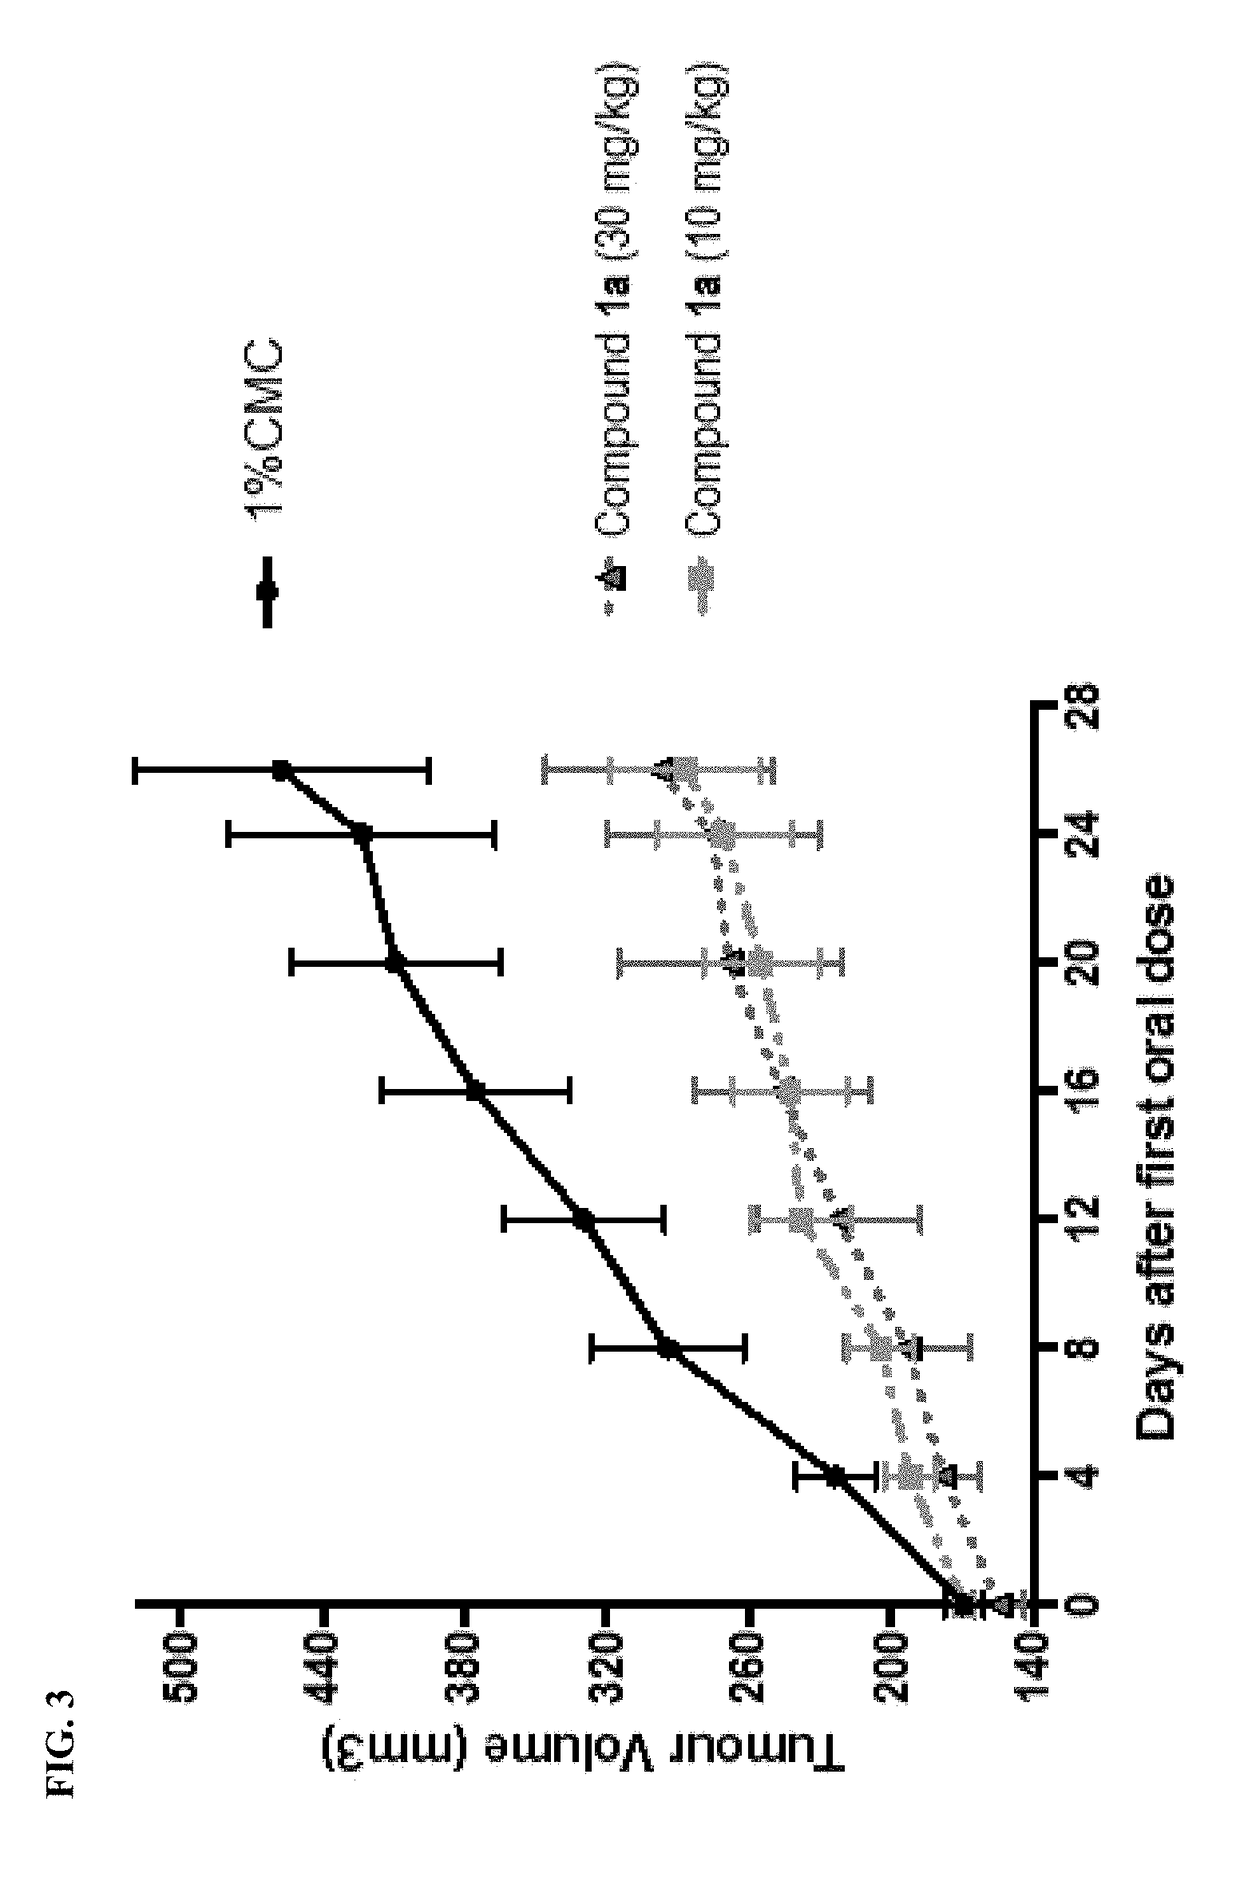 Bisphenol derivatives and their use as androgen receptor activity modulators